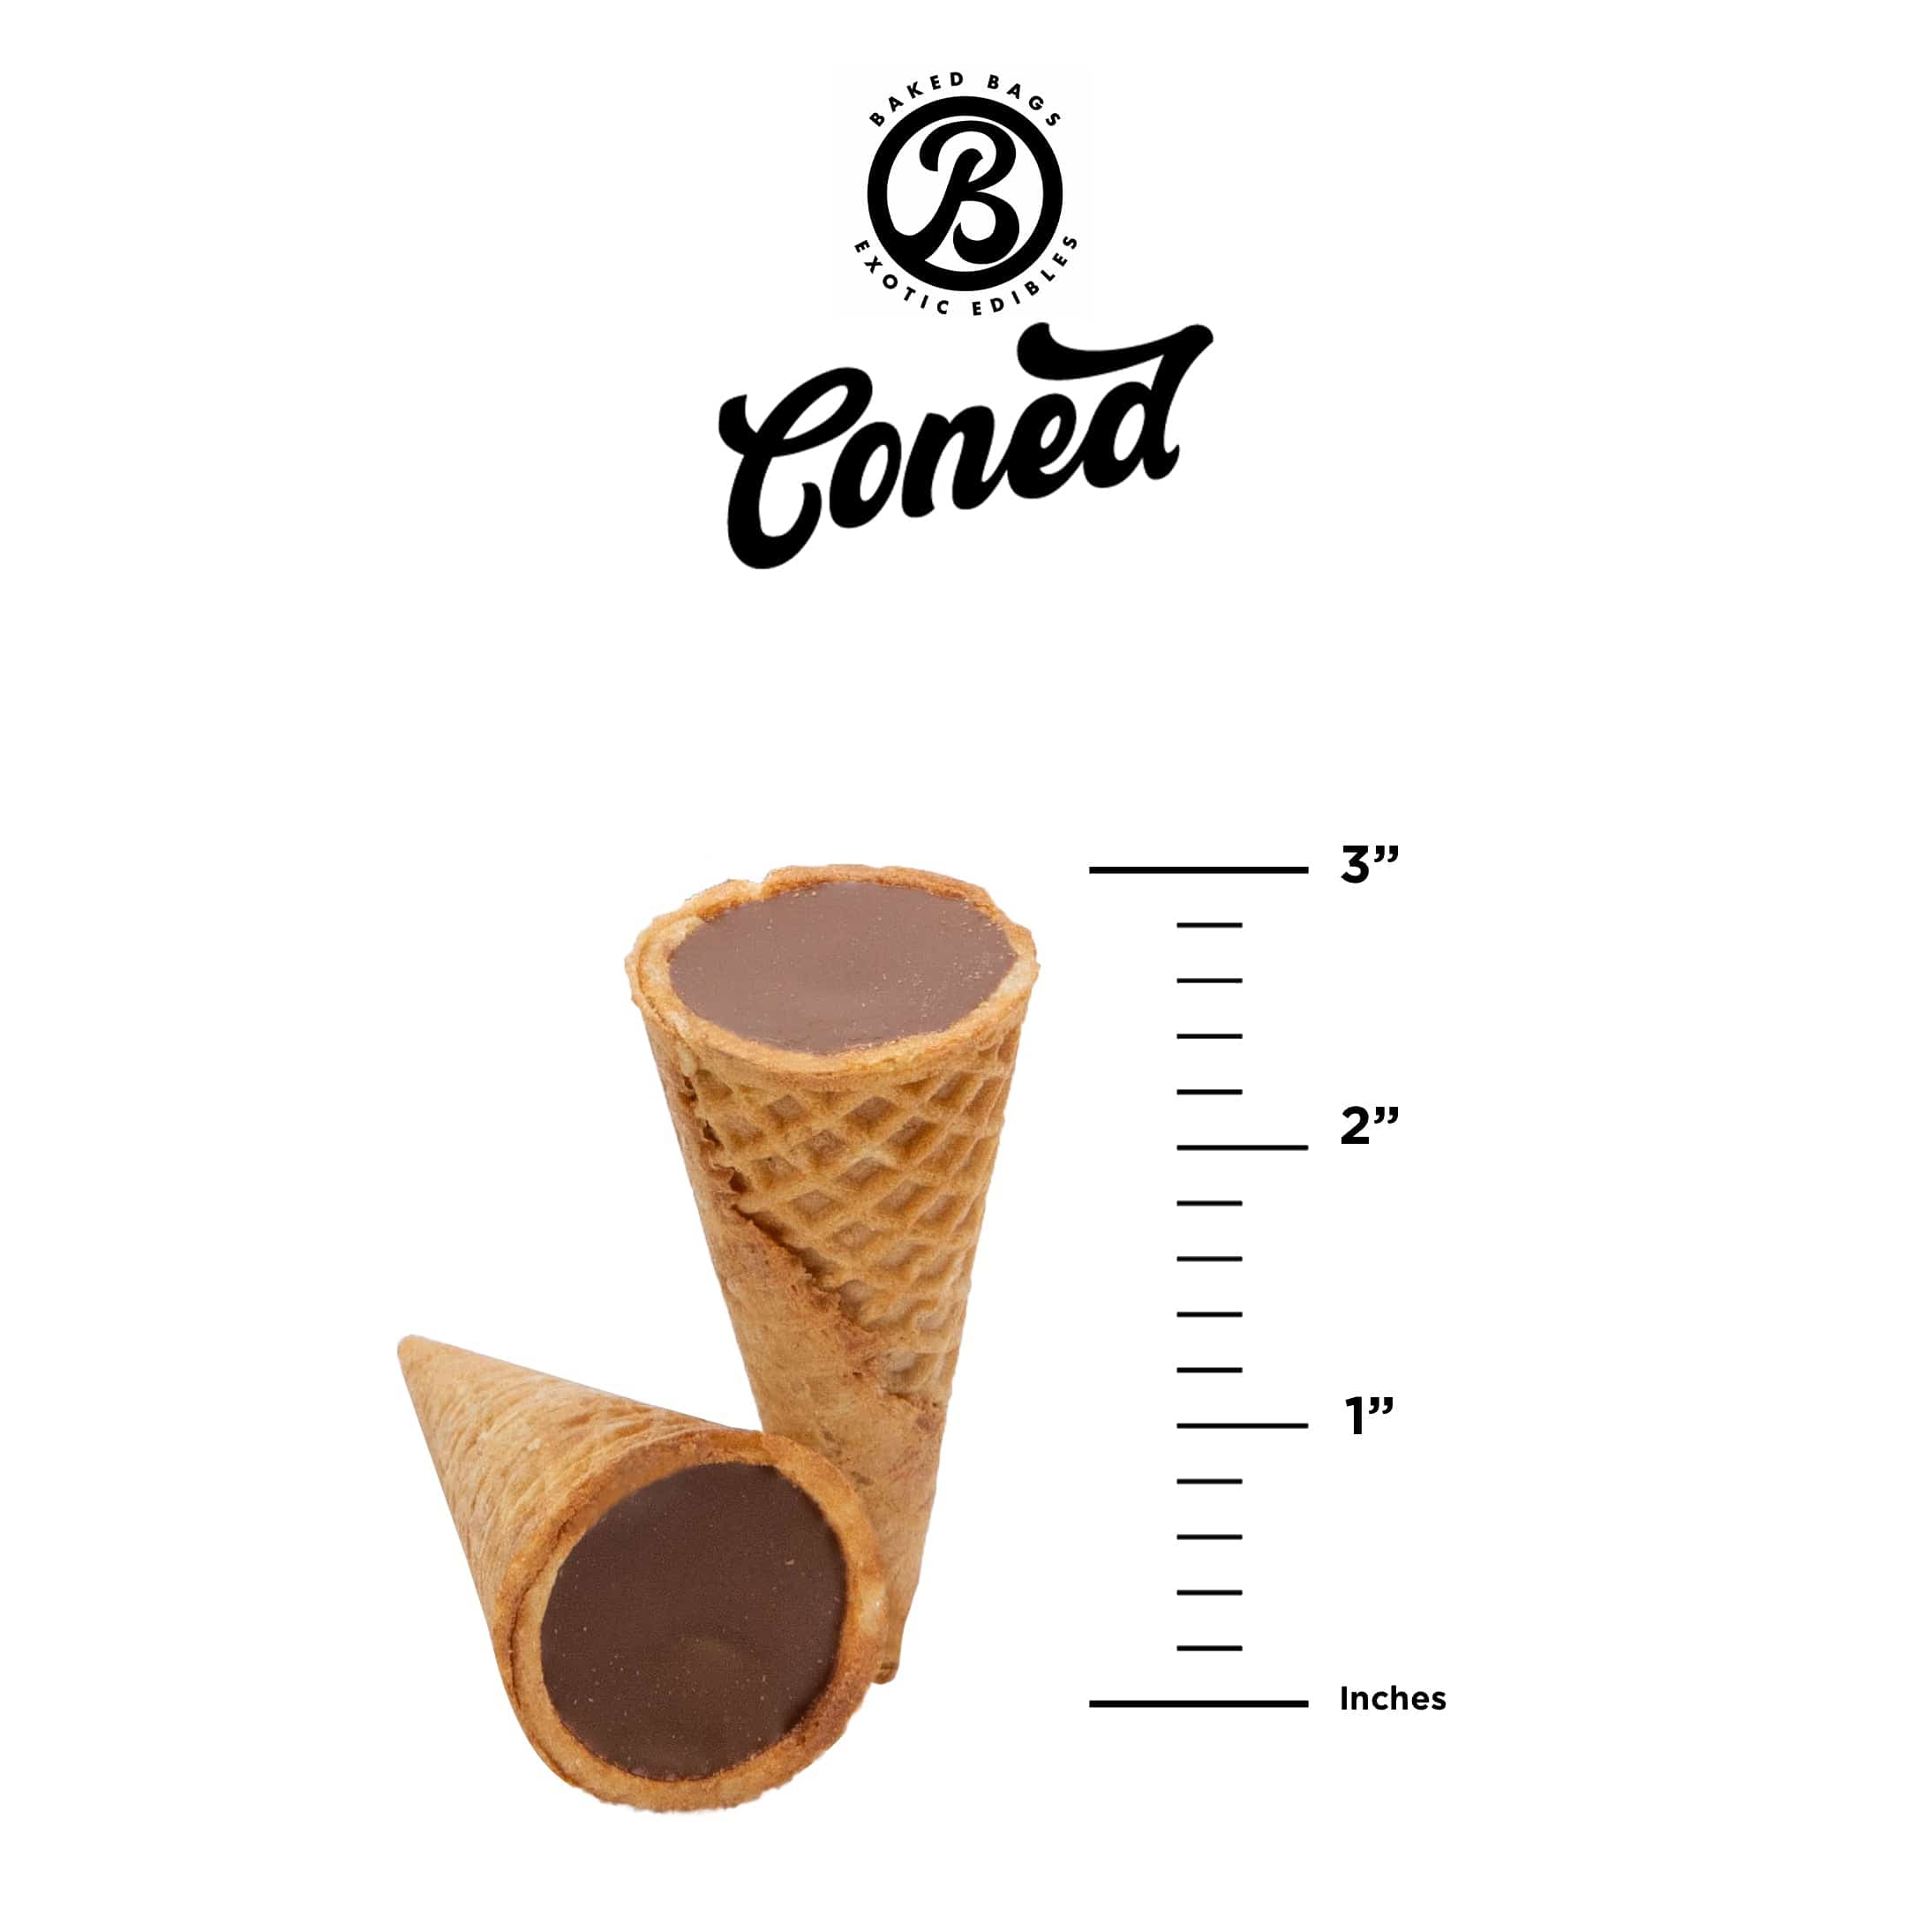 Baked Bags Coned Edible Ice Cream Cone Edibles Baked Bags   